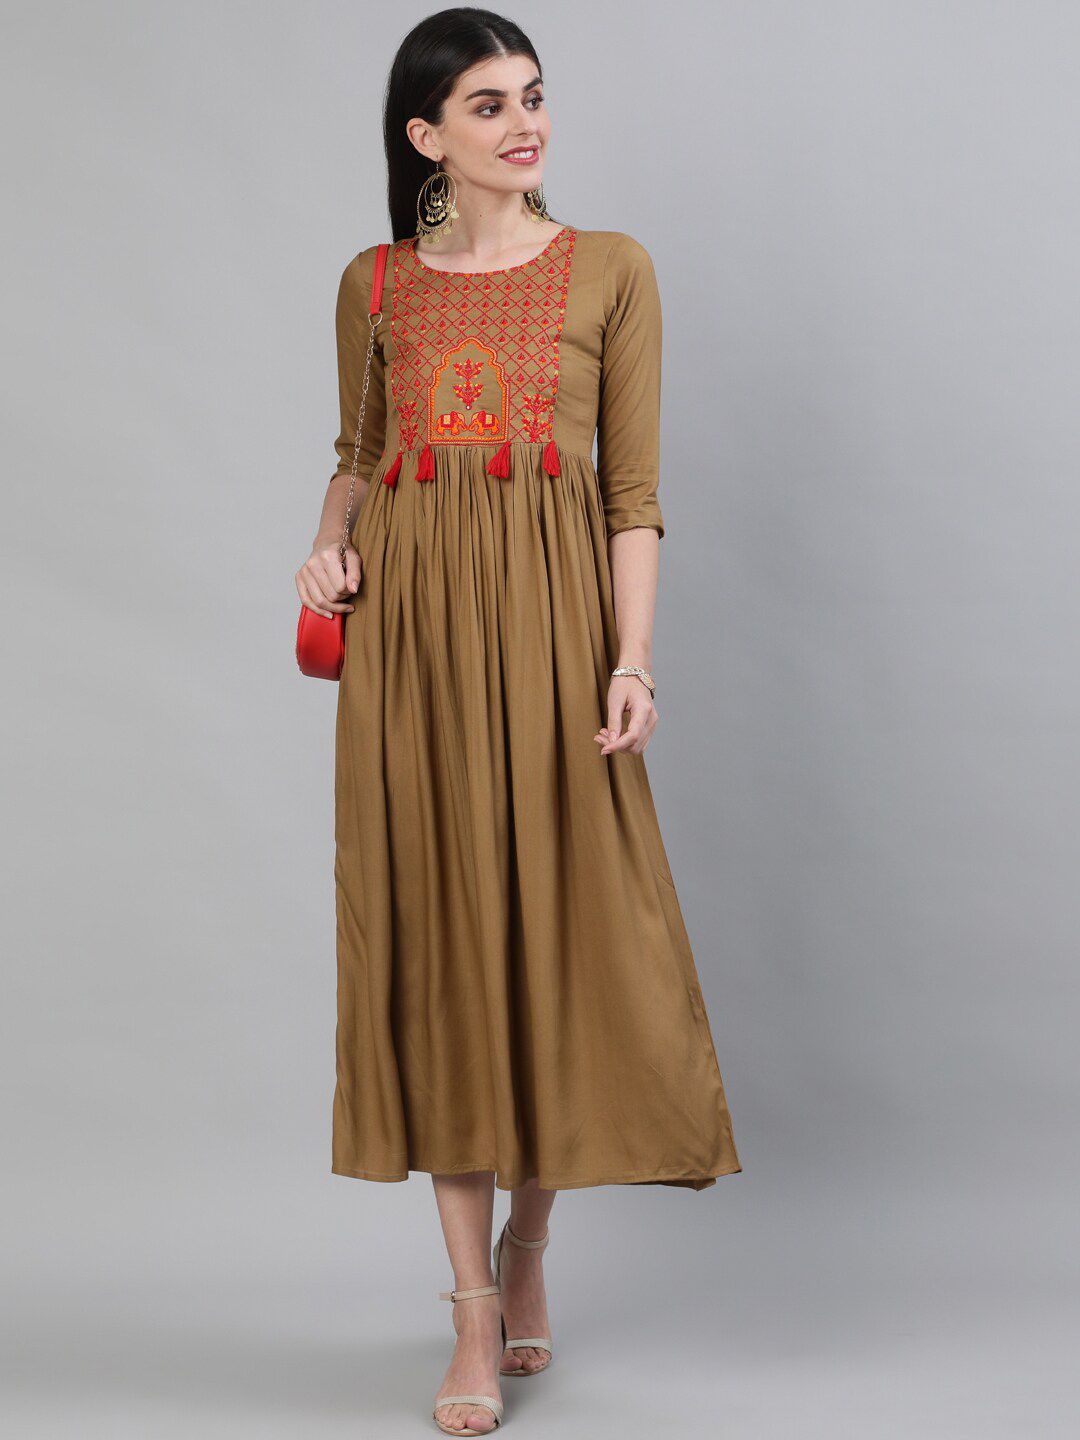 KIMAYRA Brown Embroidered Ethnic A-Line Midi Dress Price in India